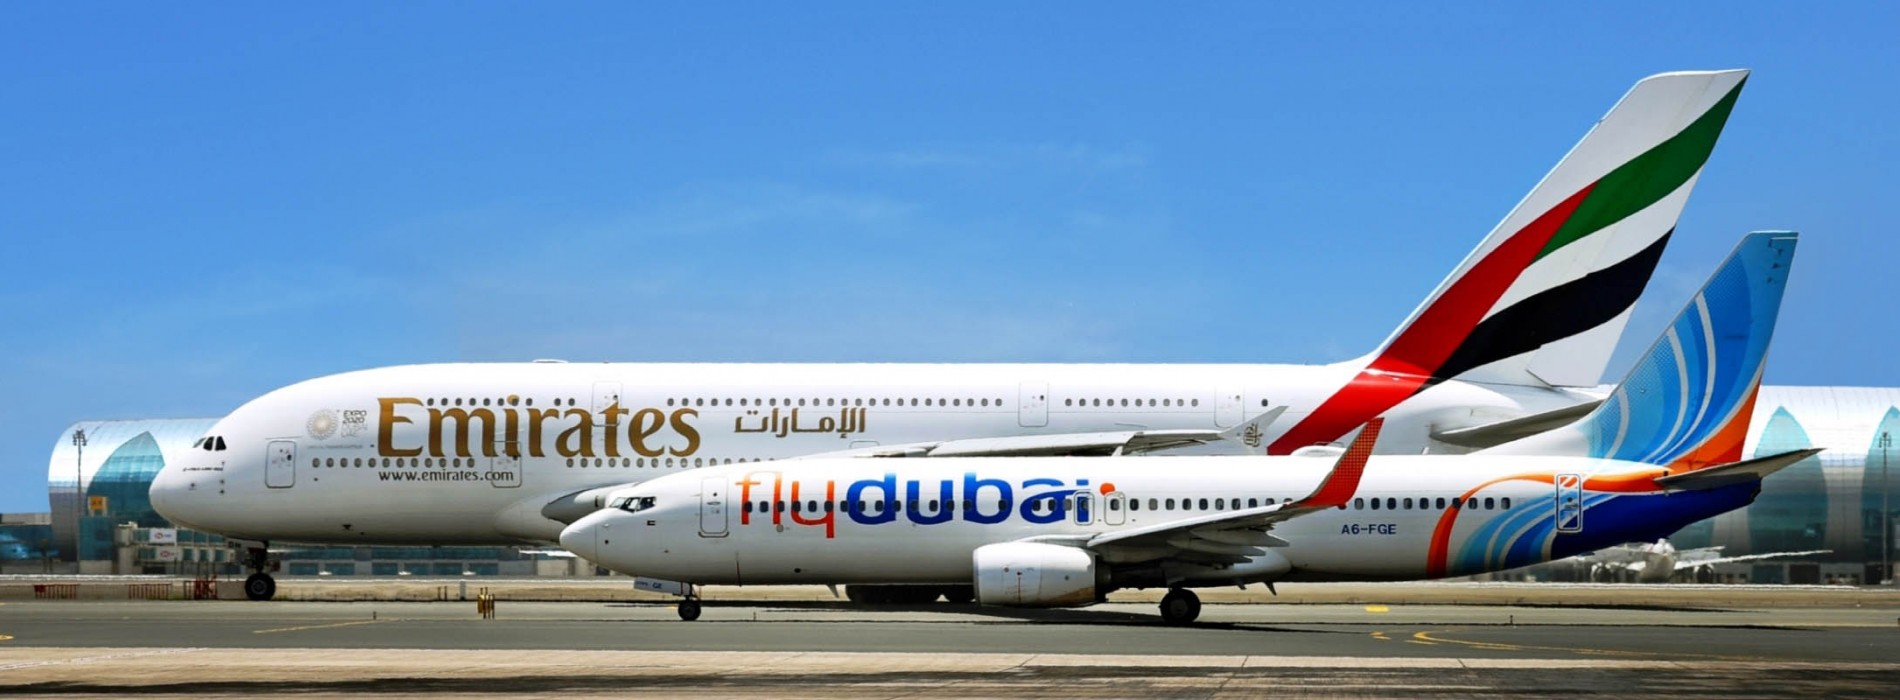 Emirates Skywards expands loyalty programme to include both Emirates airline and flydubai